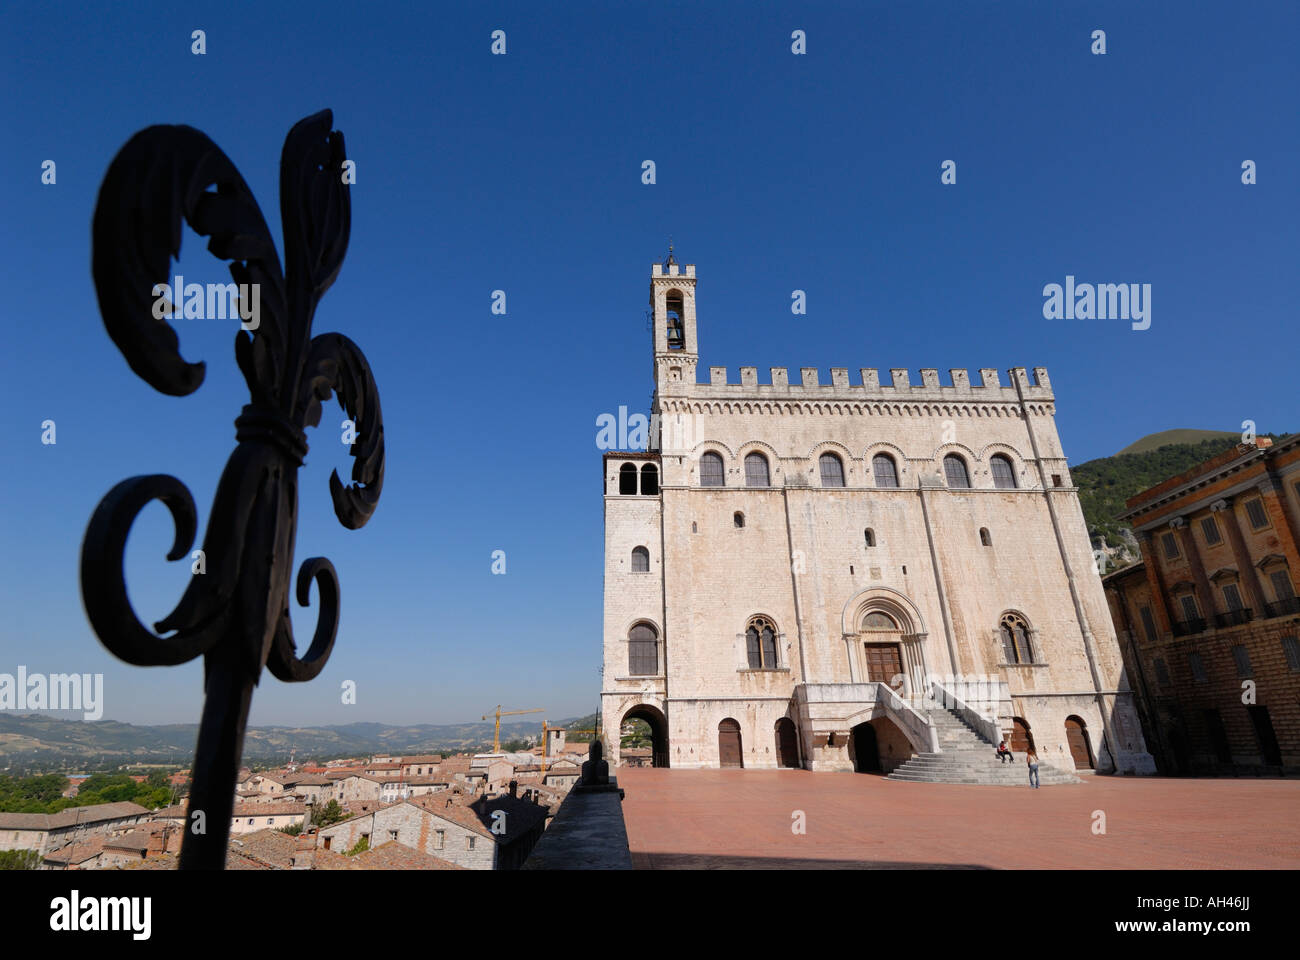 Gubbio Umbria Italy Palazzo dei Consoli on Piazza Grande and the wrought iron Fleur de Lys a motif found throughout the town Stock Photo